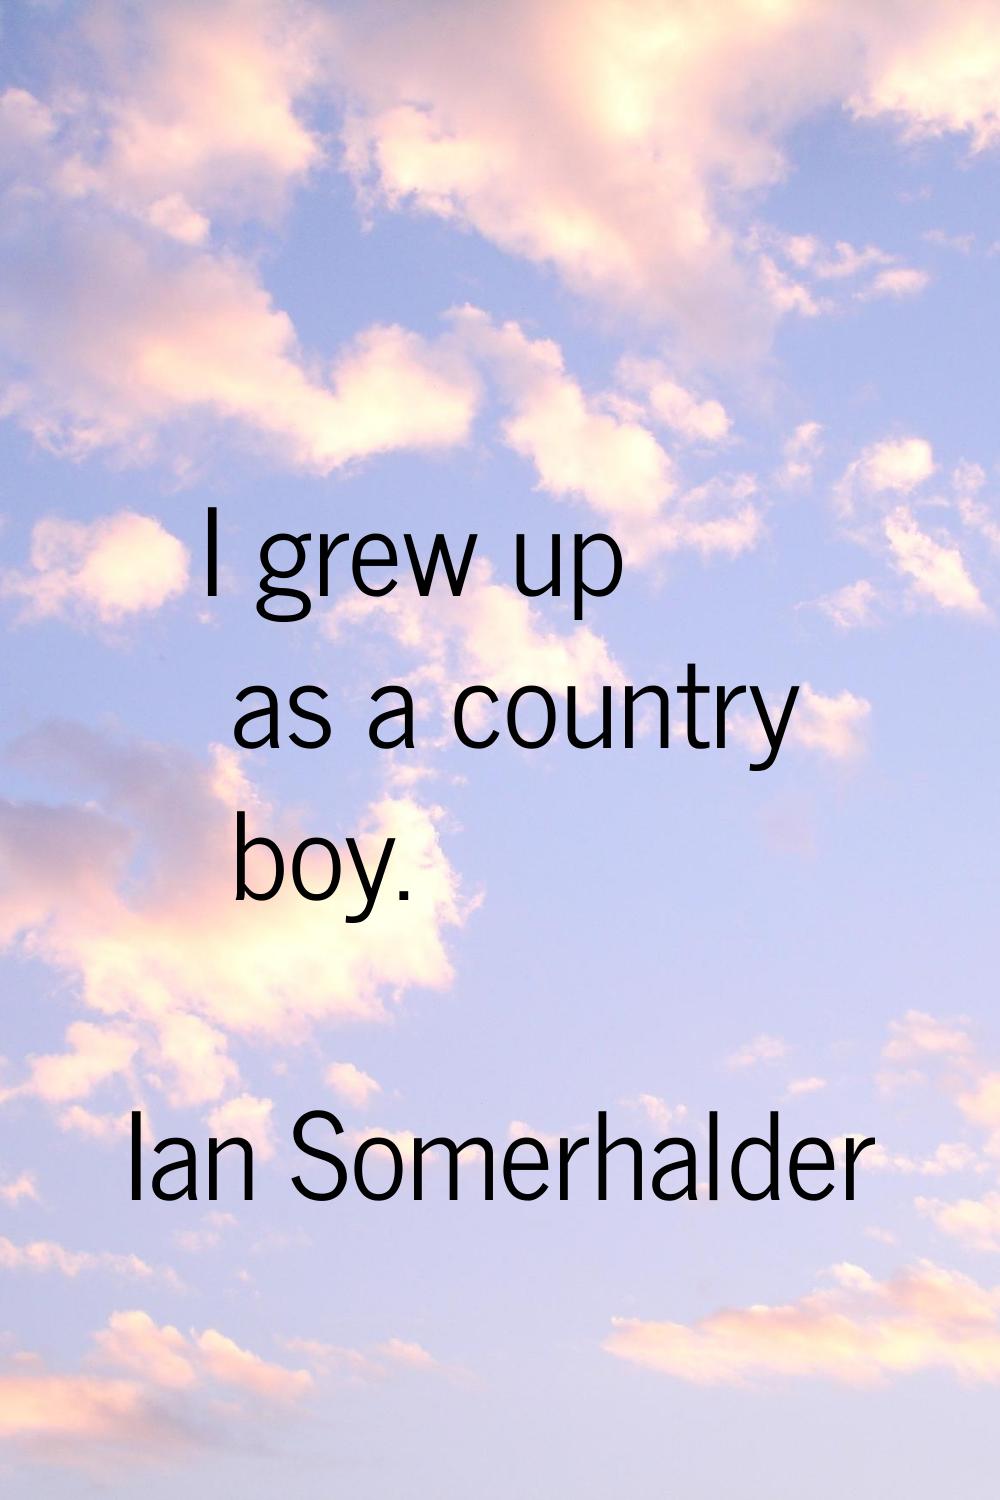 I grew up as a country boy.